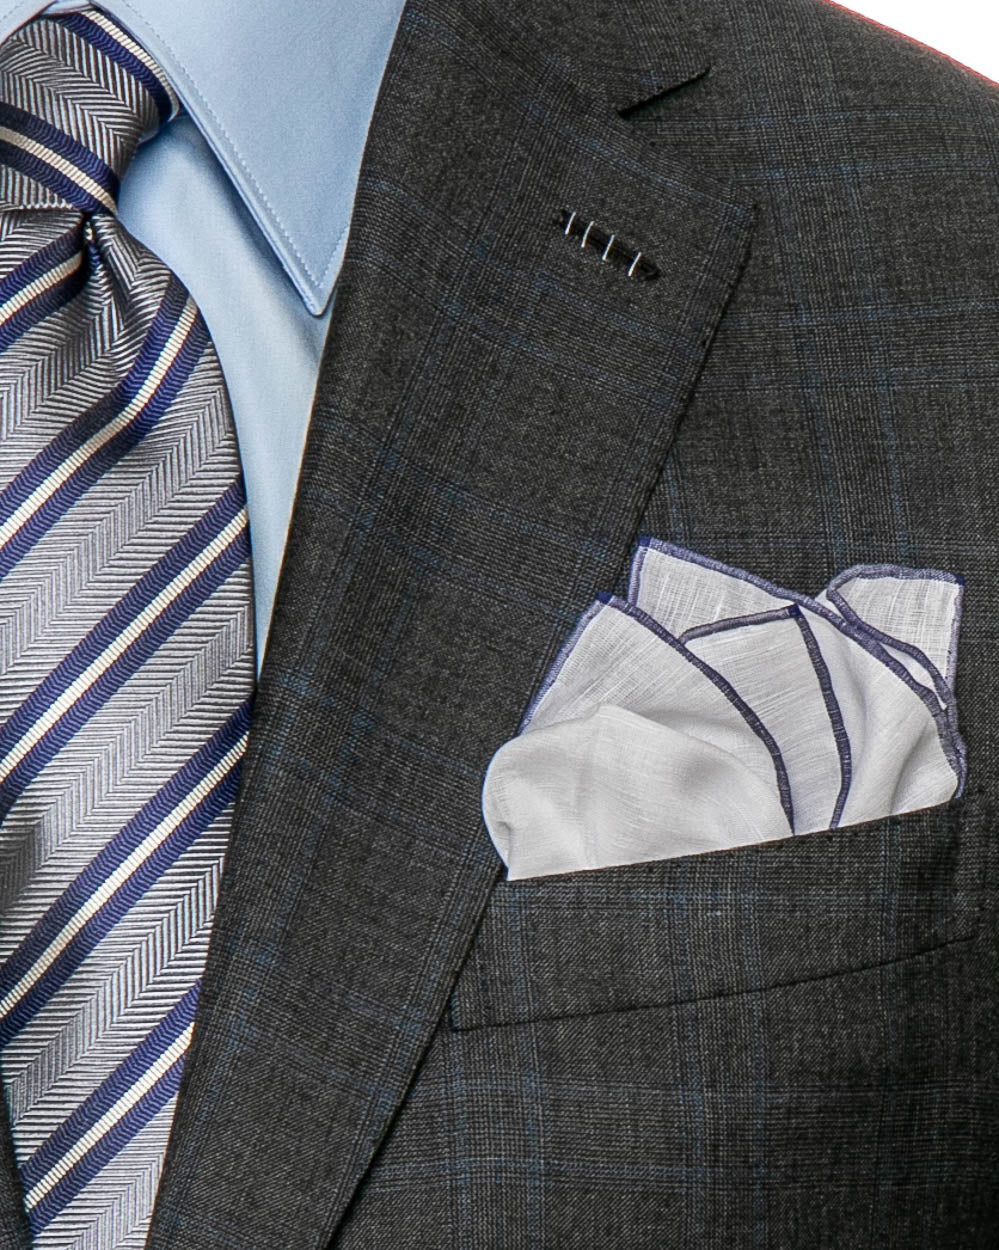 Charcoal Glen Plaid with Blue Windowpane Suit